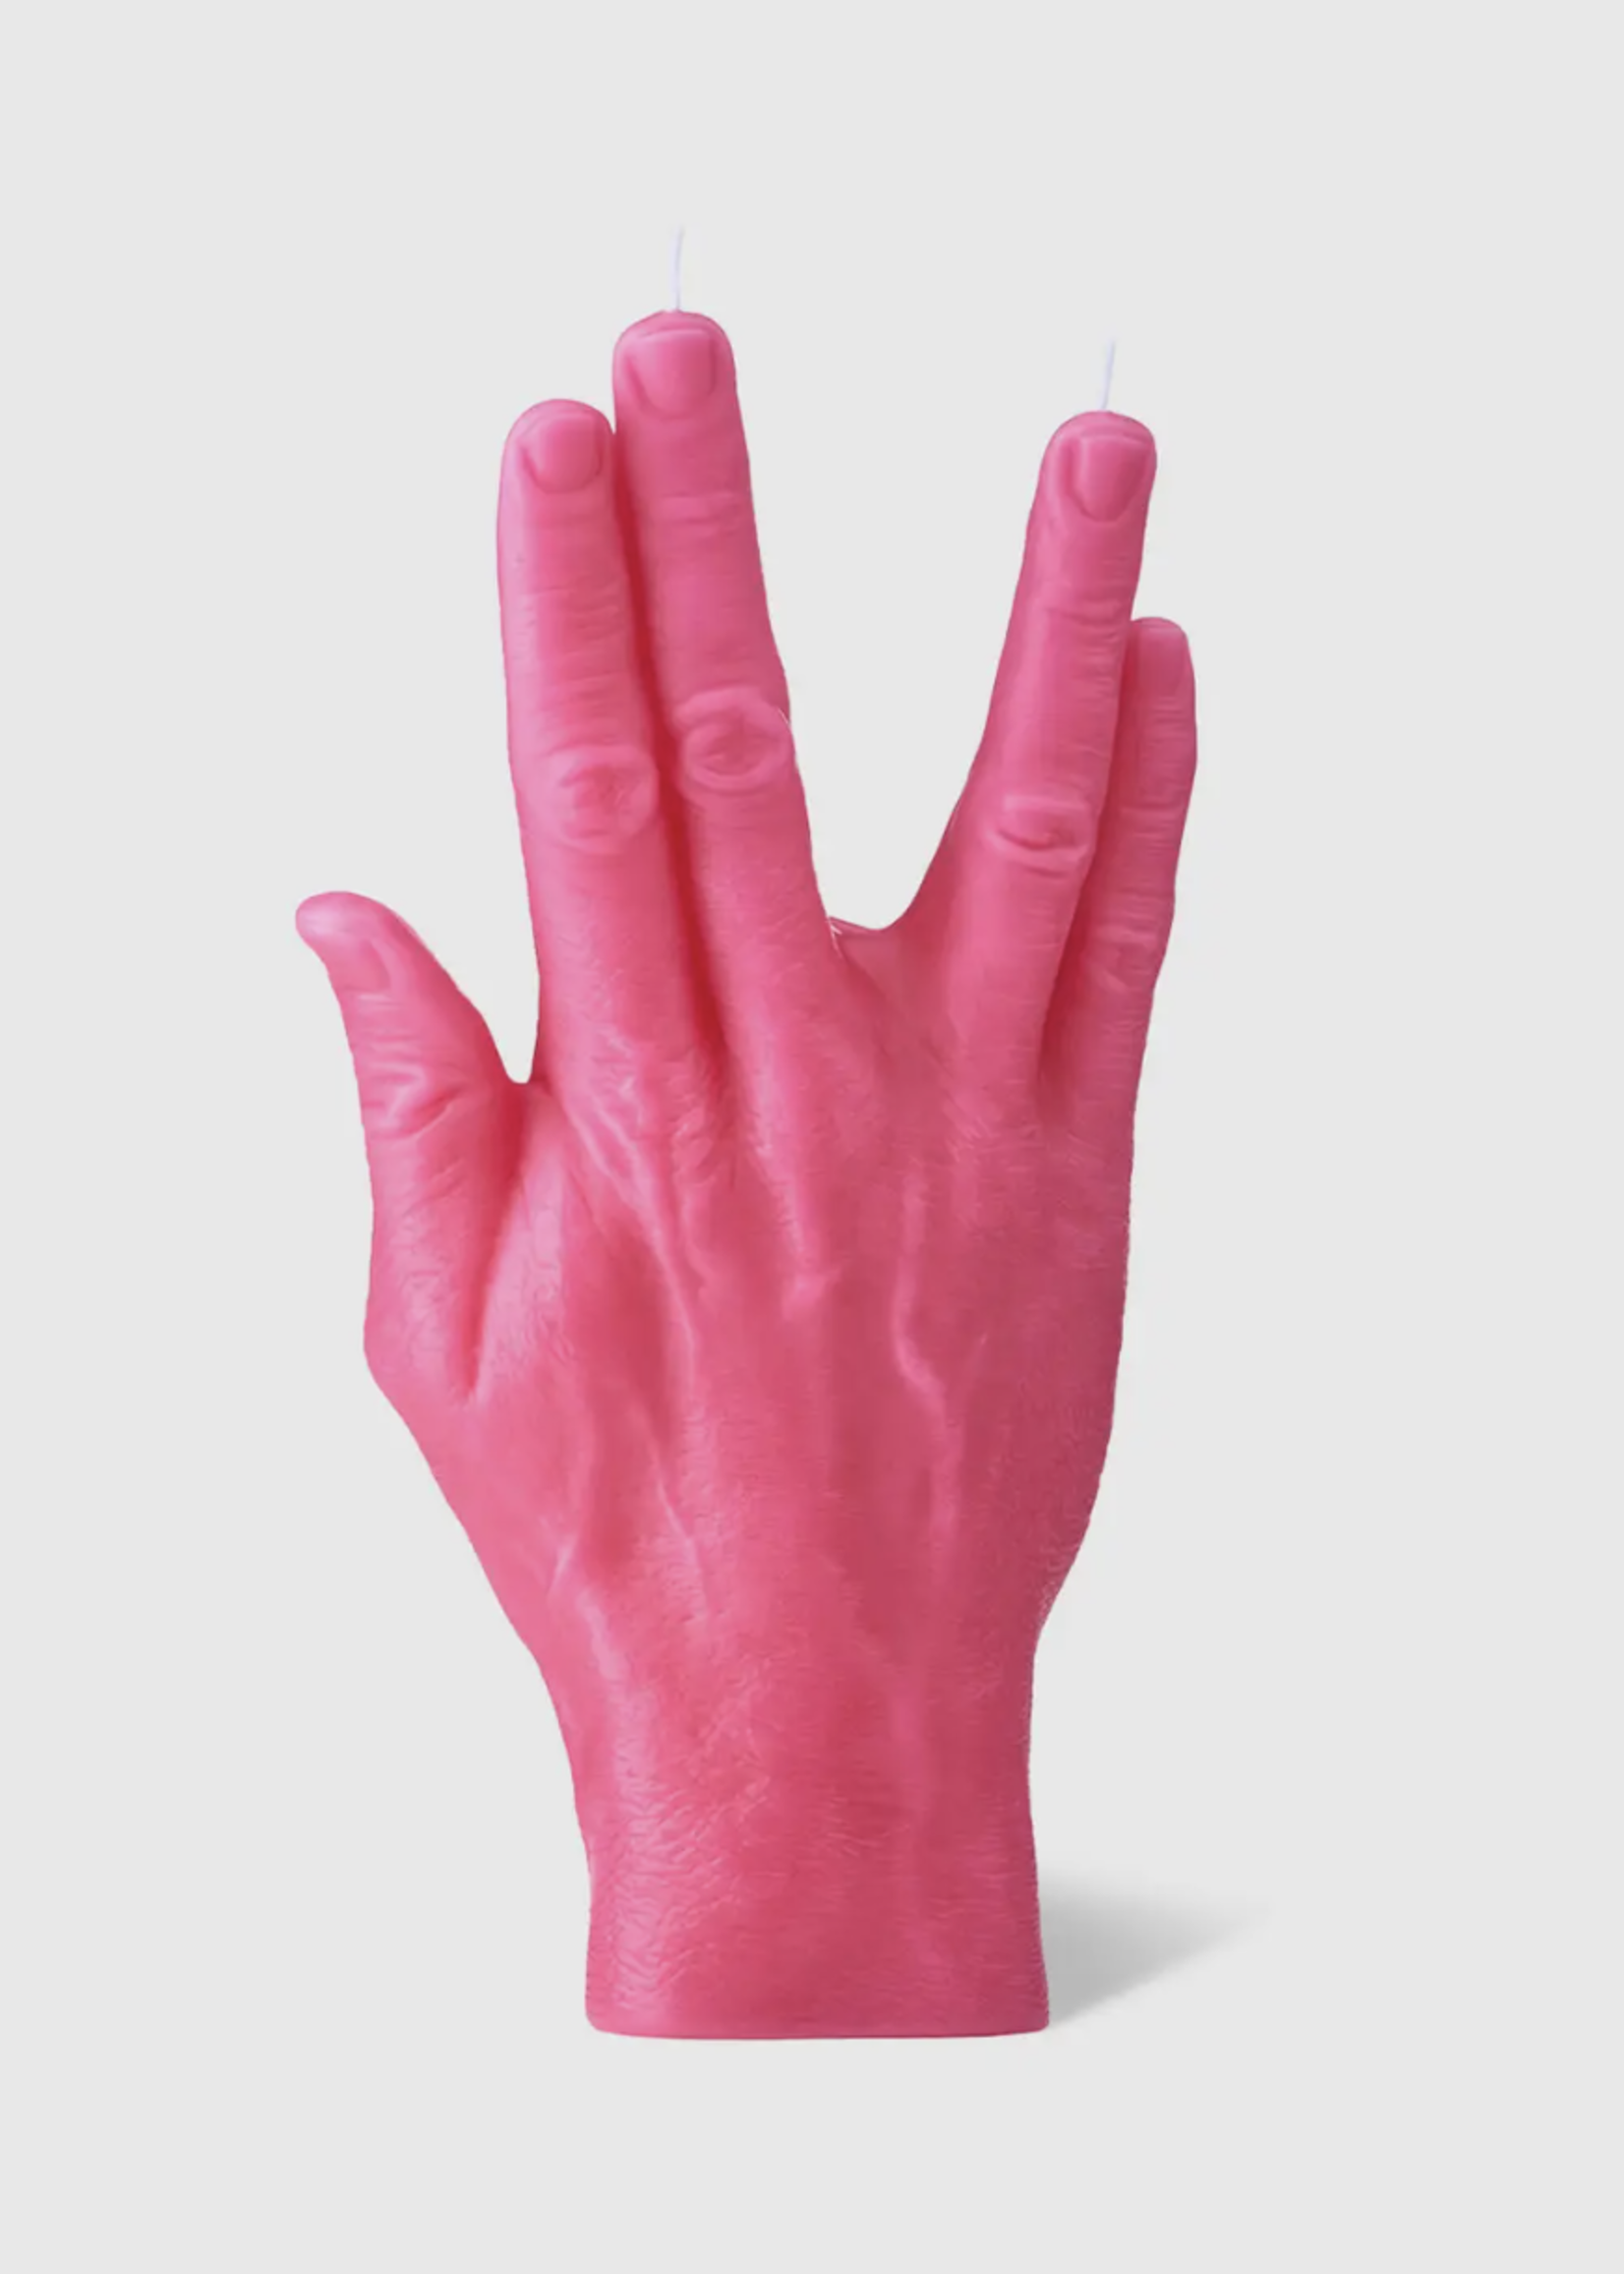 Creative Twist Events CandleHand Gesture Candle "LLAP"  Pink